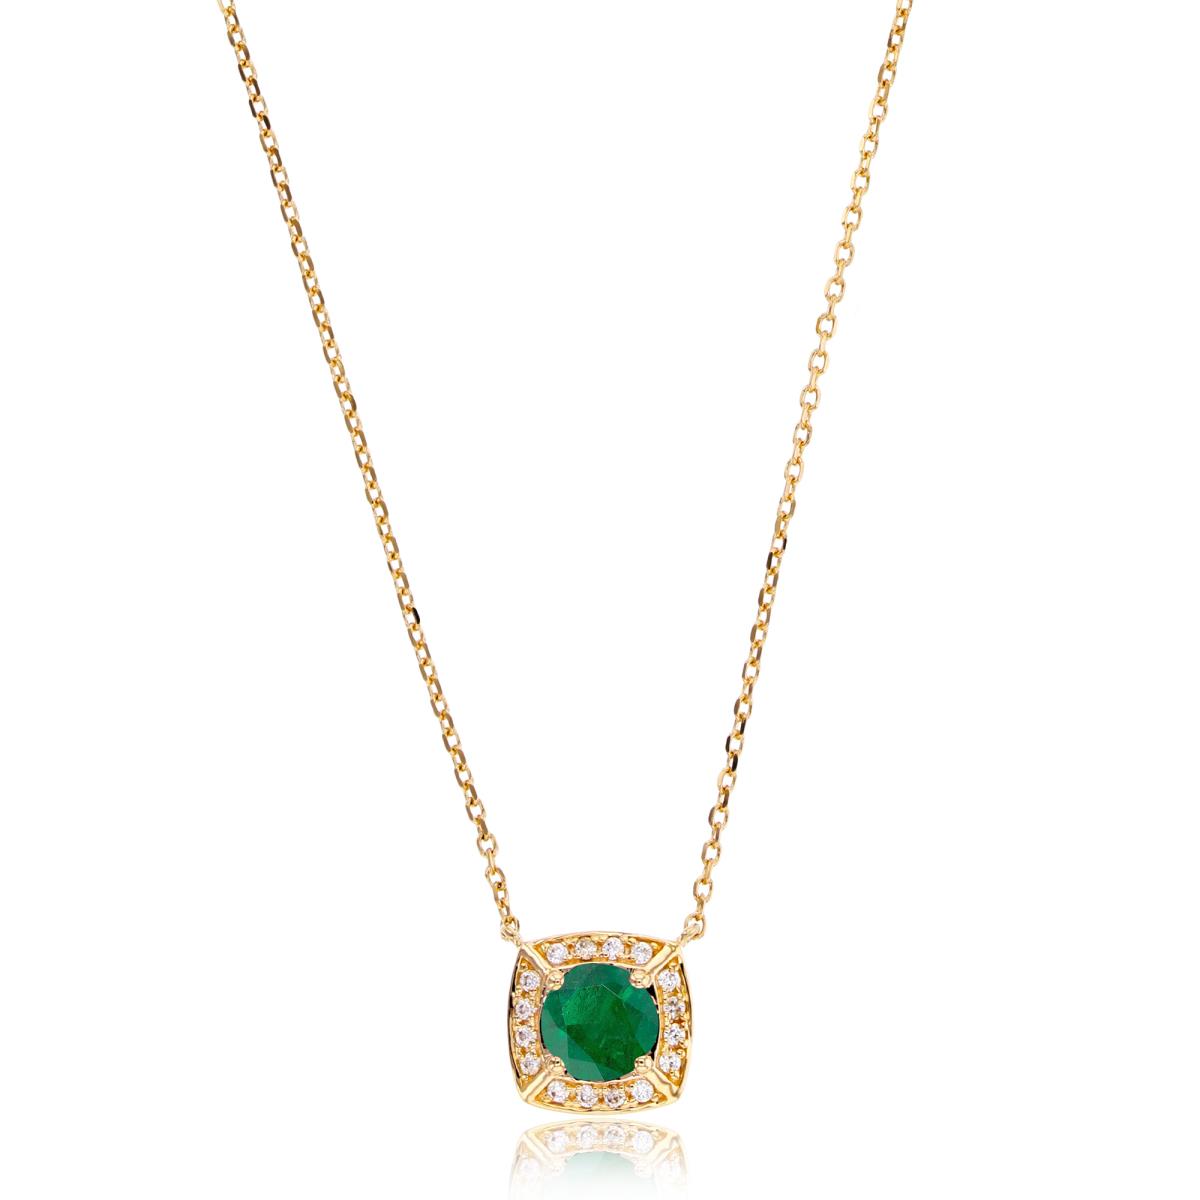 14K Yellow Gold 0.08 CTTW Rd Diamond & 5mm Rd Emerald Cushion 18" Necklace